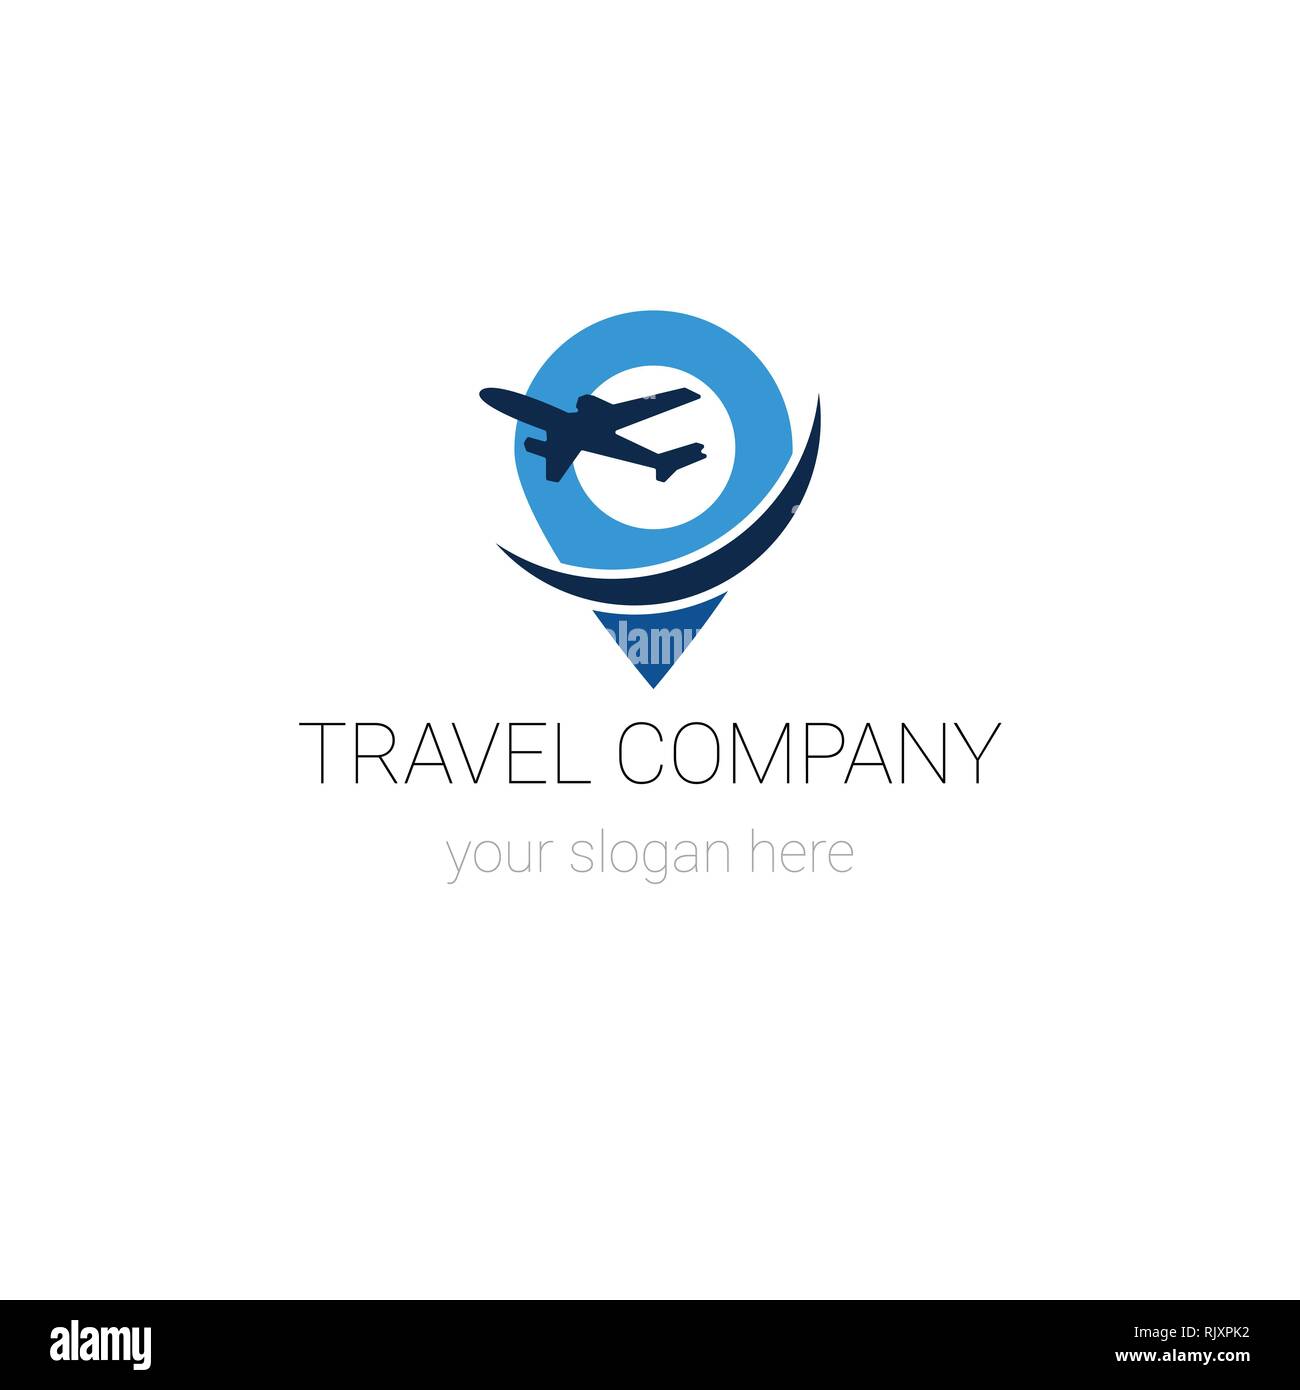 Travel Company Logo Template Isolated On White Background Tourism Agency Banner Design Stock Vector